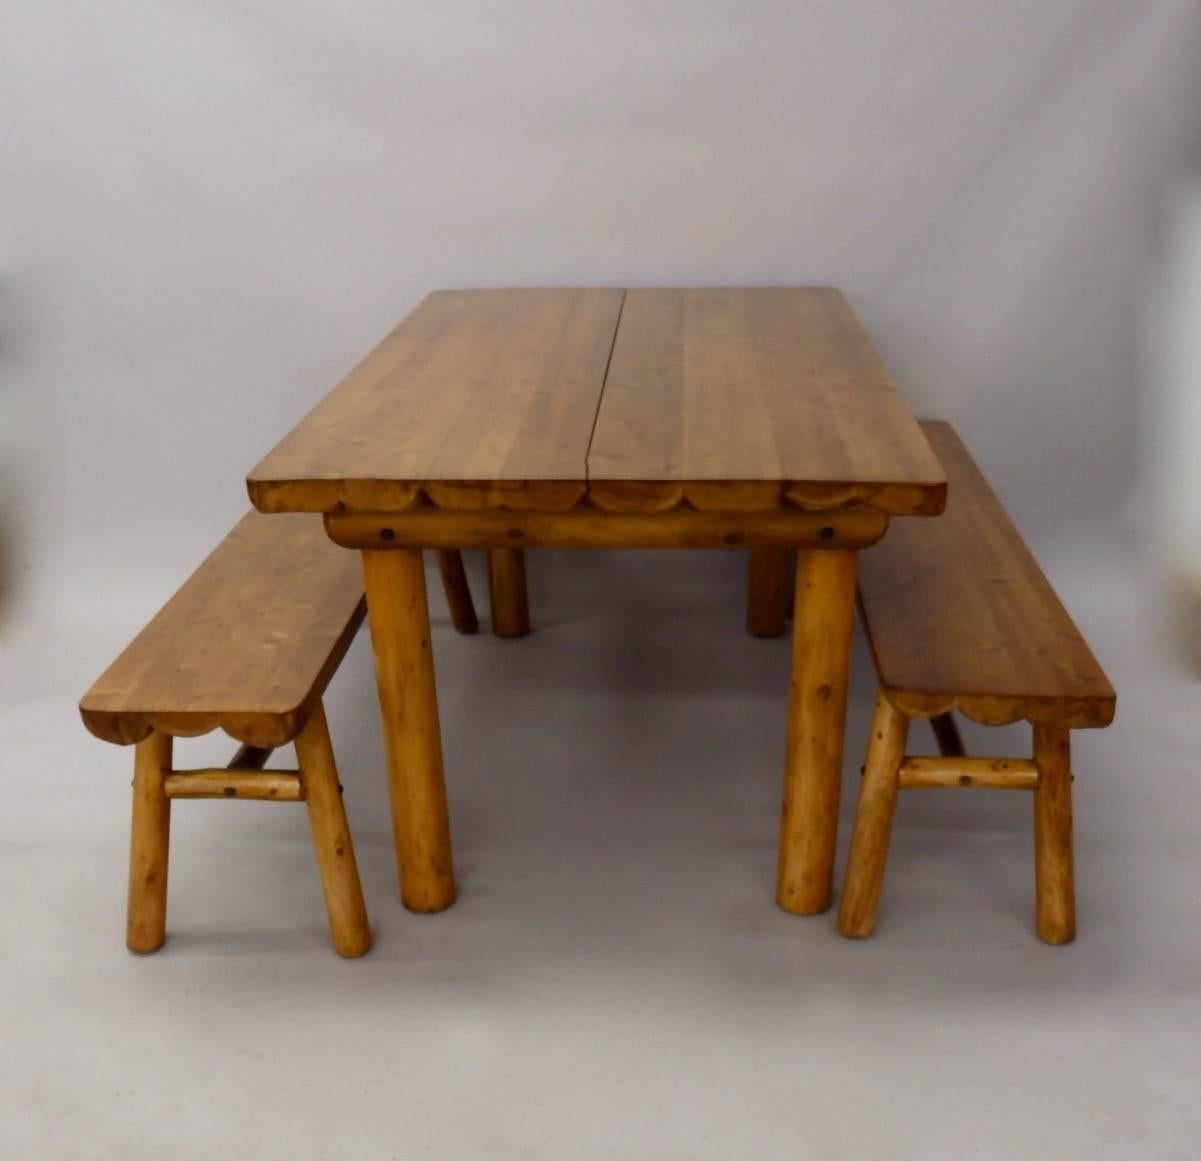 Adirondack style rustic ranch, cabin or cottage table with two benches. I believe this is Cedarwood. Table and bench tops are half logs with log / branch stretchers.
Measurements are for the table. Benches measure 12 x 60 at 18 tall.